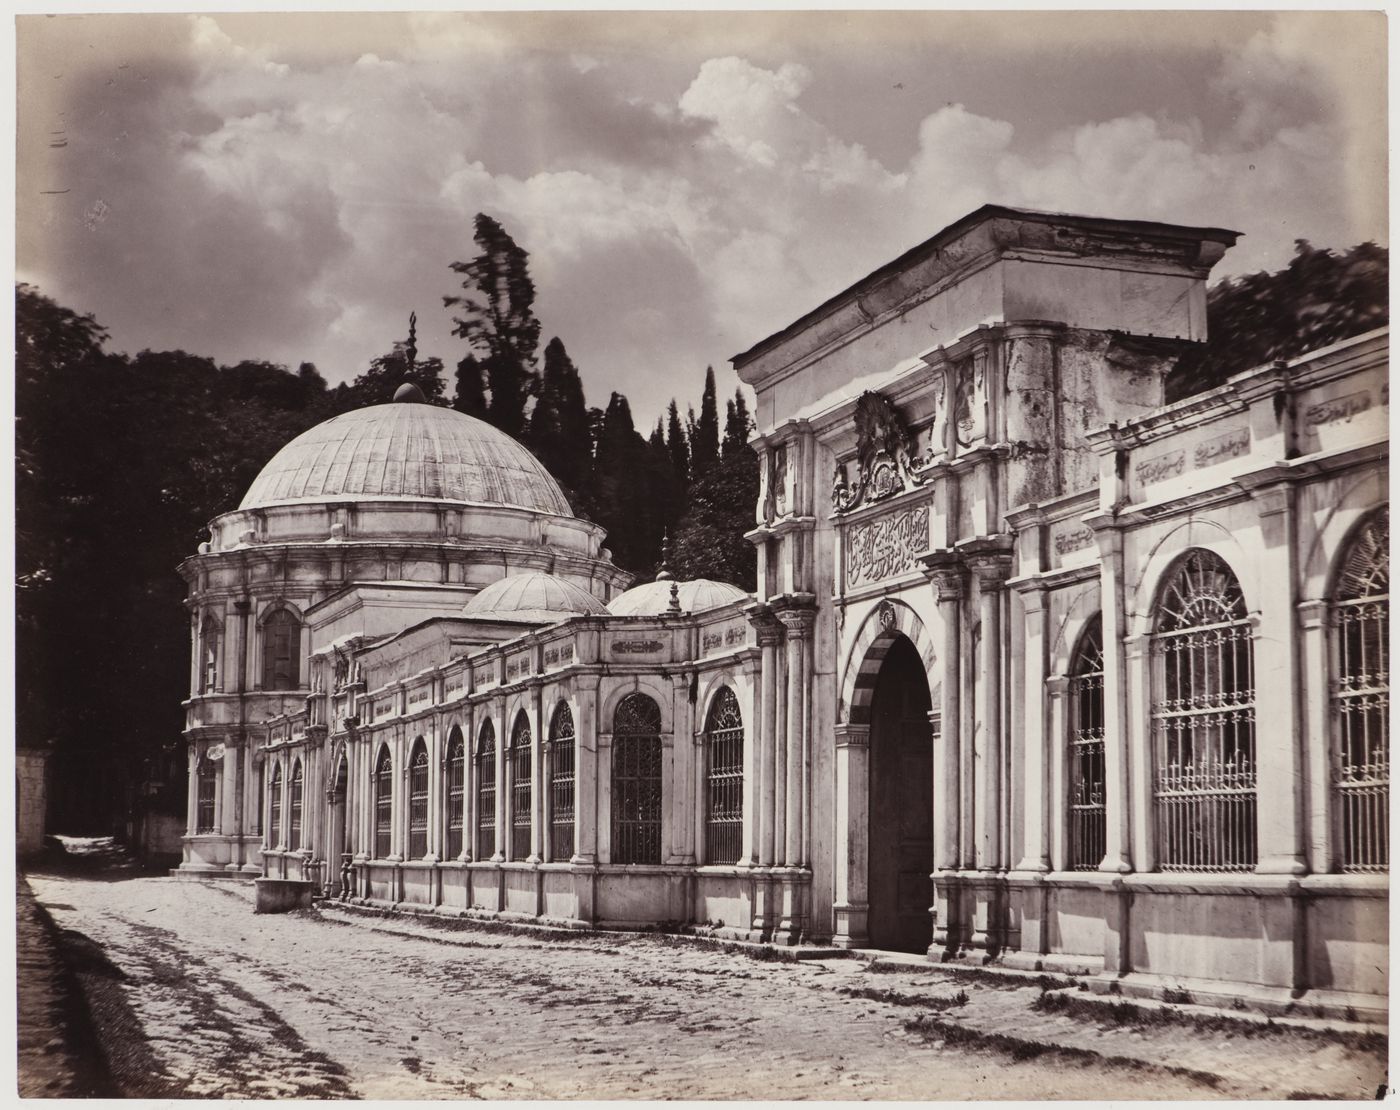 View the Sultan Camii (also known as the Eyüb Mosque) complex, Eyüb, Constantinople (now Istanbul), Ottoman Empire (now in Turkey)